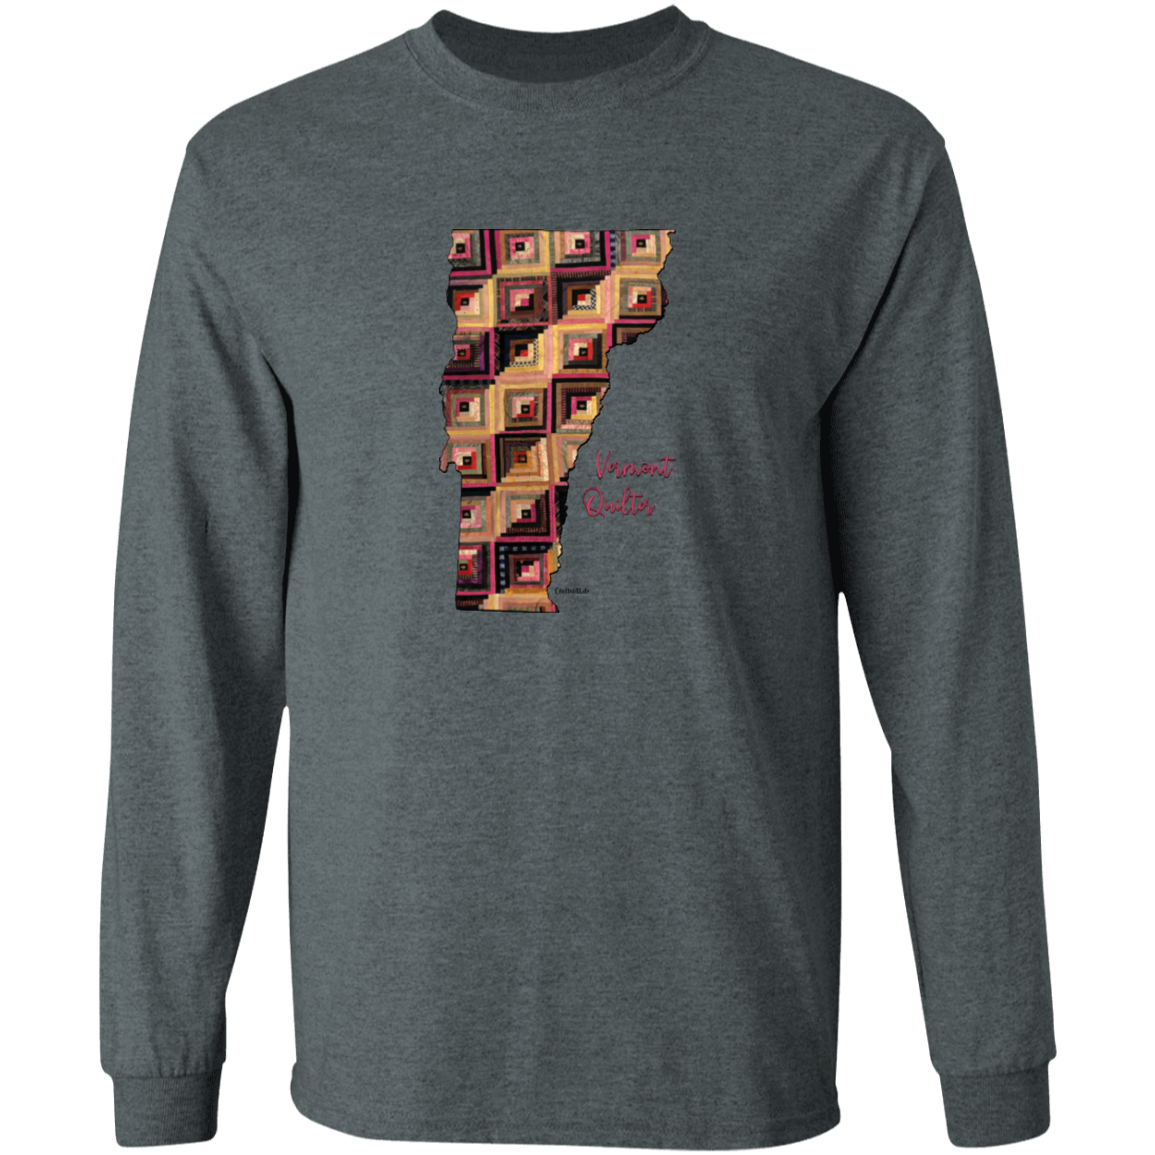 Vermont Quilter Long Sleeve T-Shirt, Gift for Quilting Friends and Family